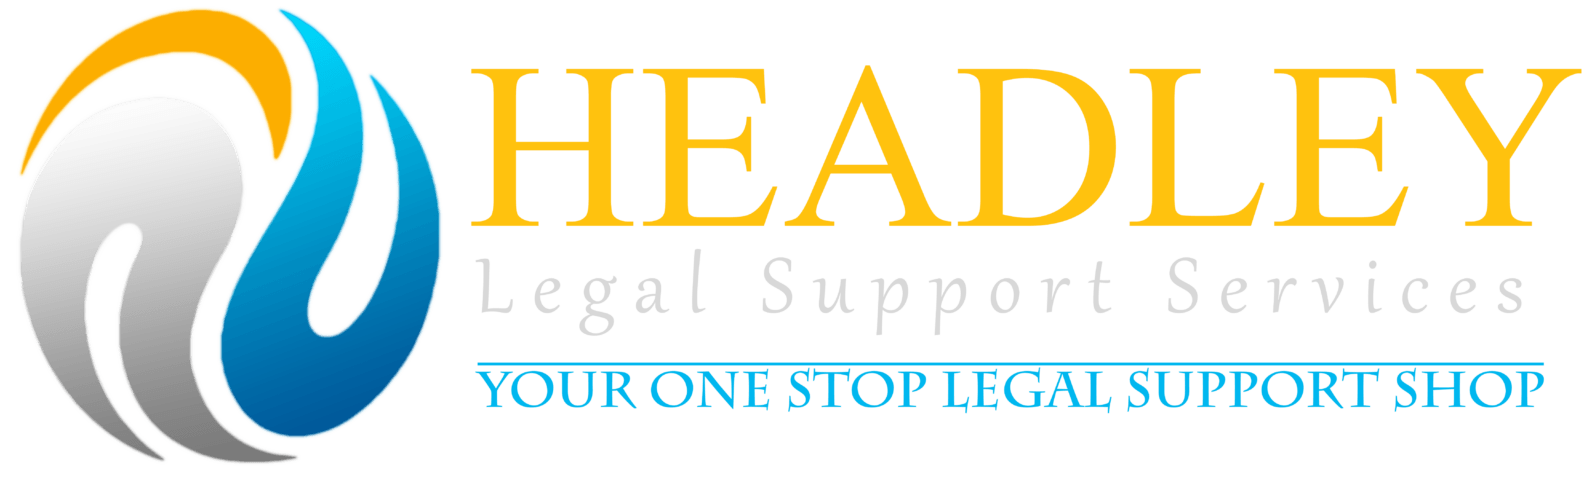 headley legal support services logo